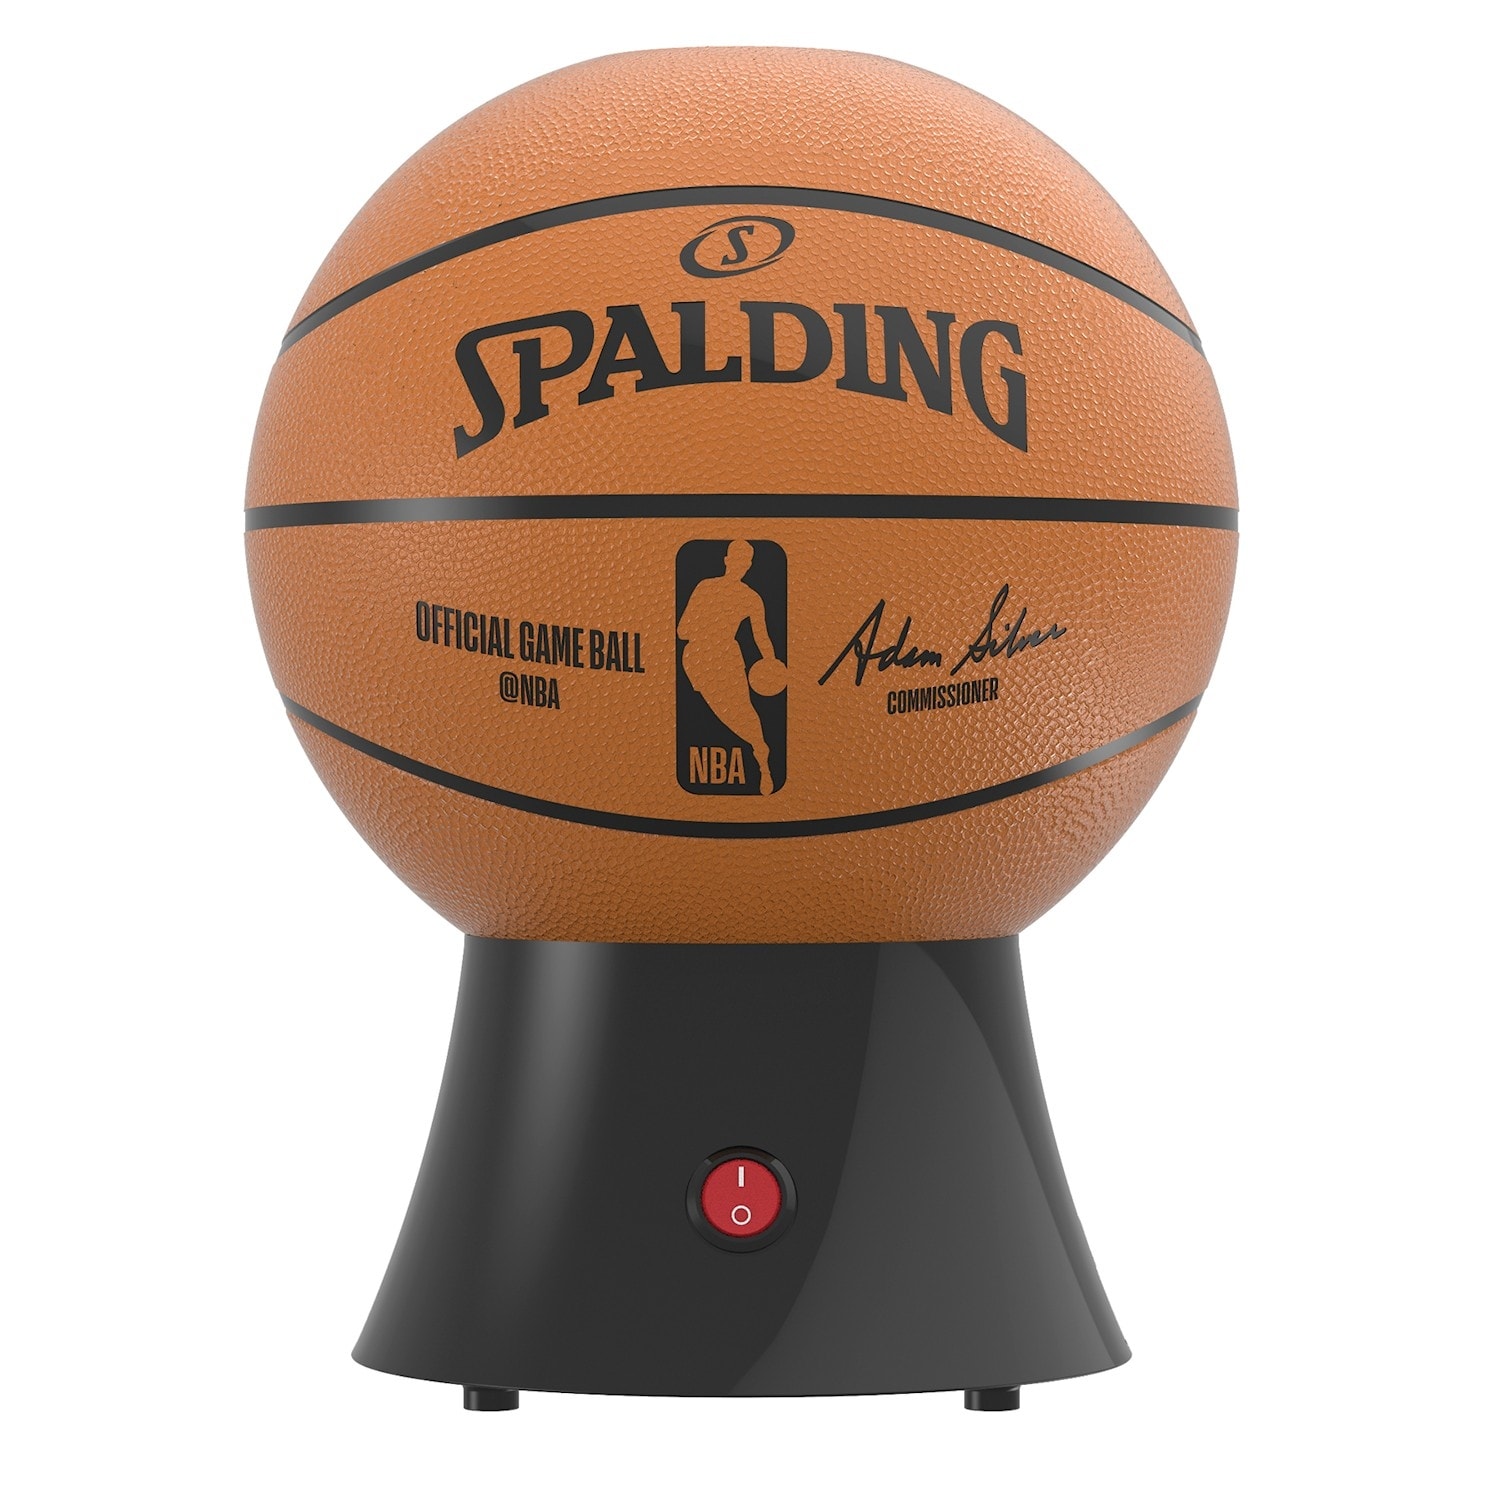 https://ak1.ostkcdn.com/images/products/is/images/direct/cfcba14bdfae59d2972c6eee9a9baafc5e6434b1/Uncanny-Brands-NBA-Popcorn-Maker---Officially-Licensed-Basketball-Shaped-Hot-Air-Popcorn-Popper-Kitchen-Appliance.jpg